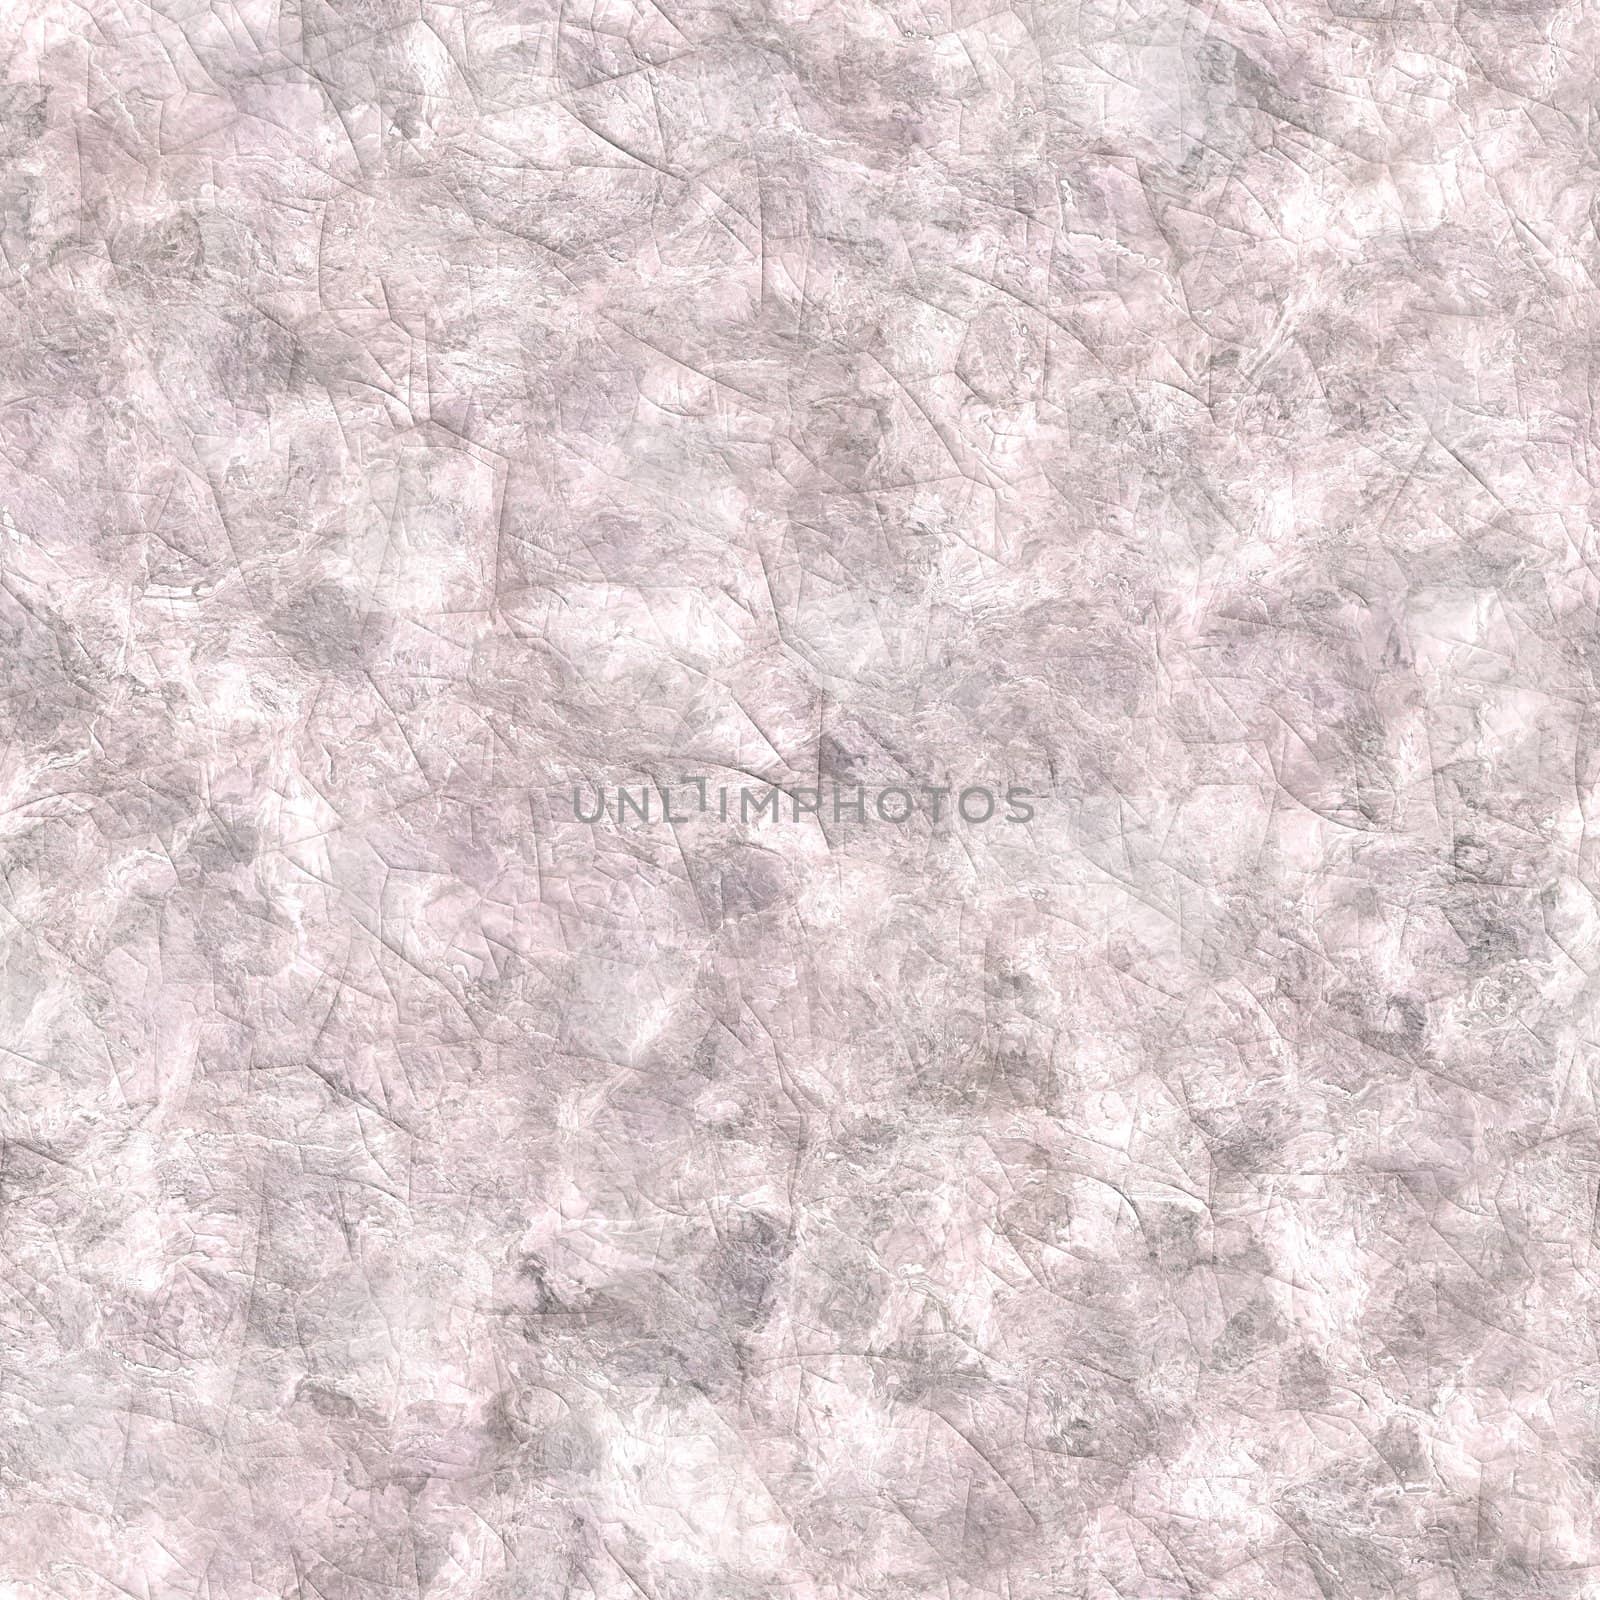 The marble texture. The gray with rose marble